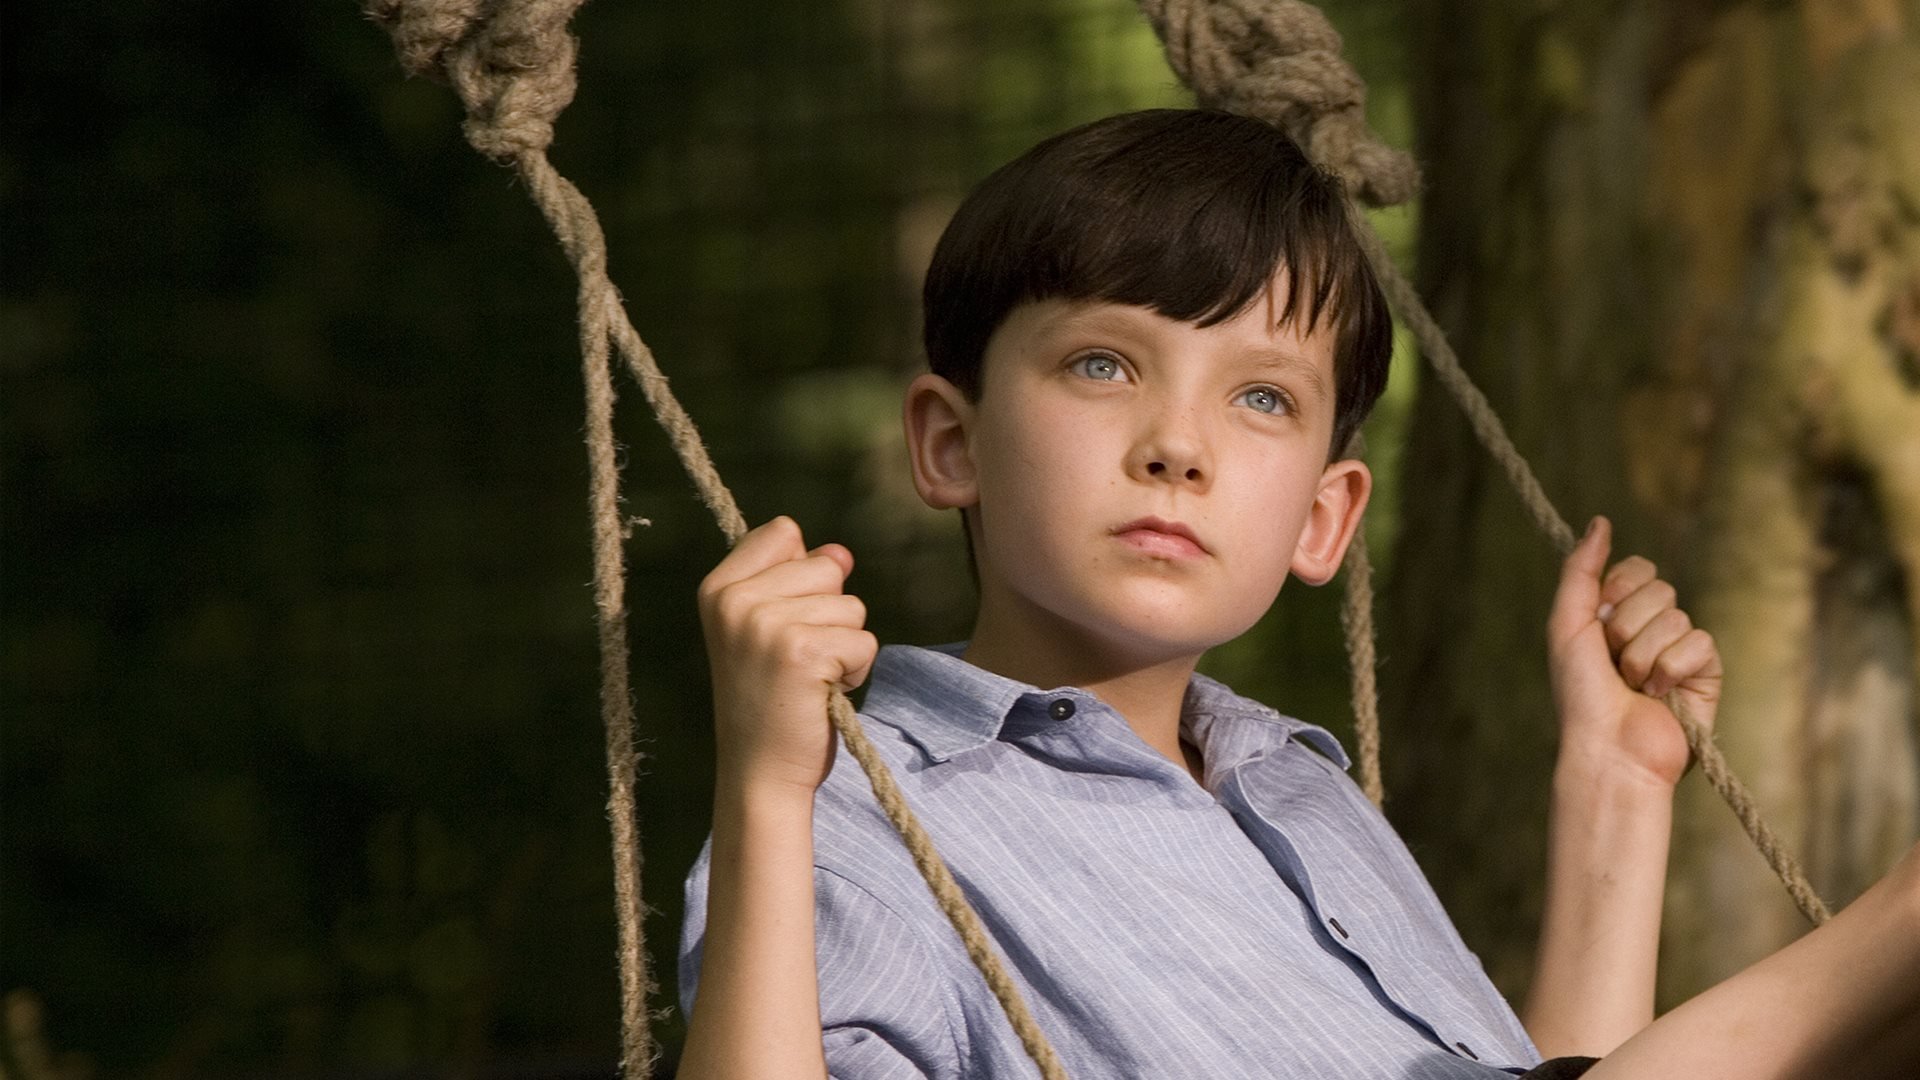 Prime Video: The Boy in the Striped Pajamas